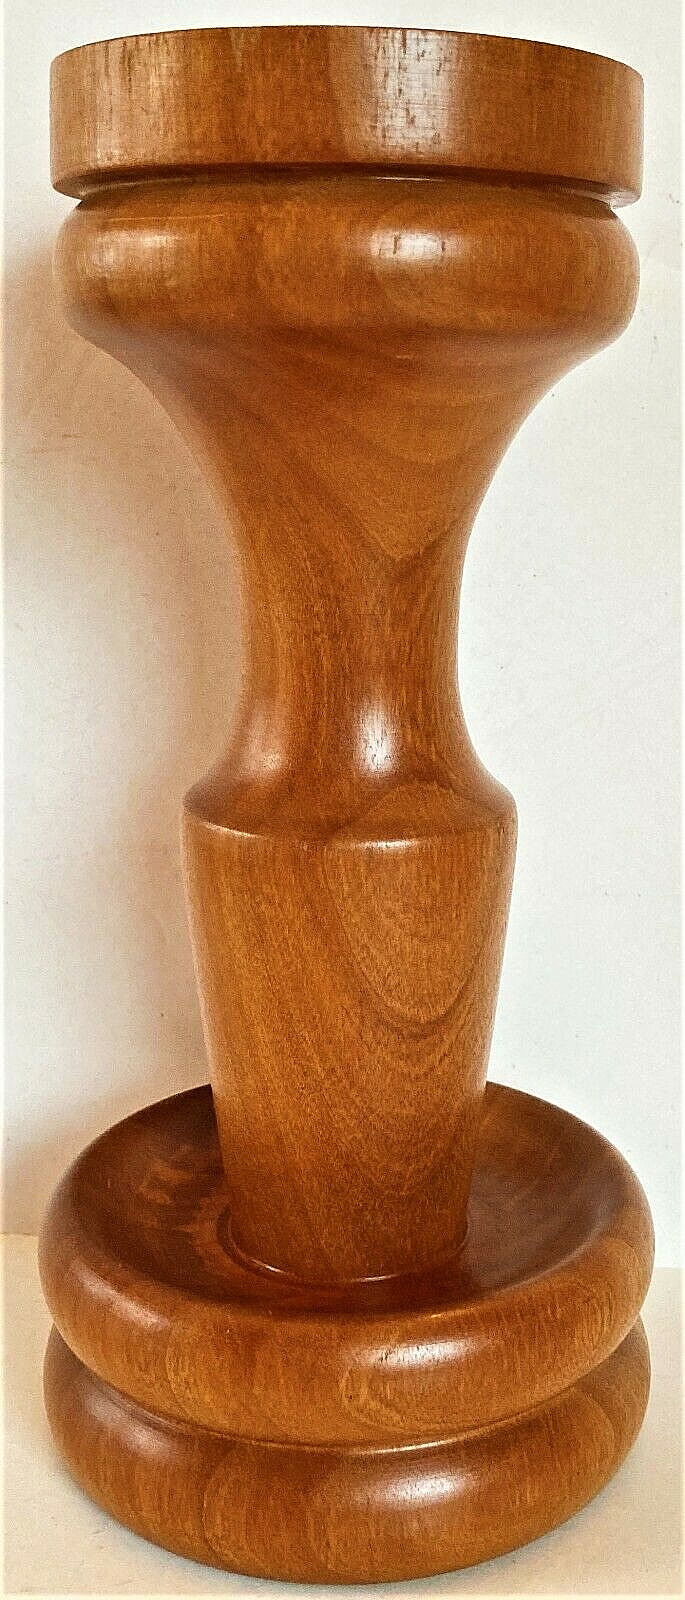 CHERRY WOOD BETTY, CRUSIE, FAT, GREASE LAMP STAND OR 'TIDY' MADE BY ME IN  2005